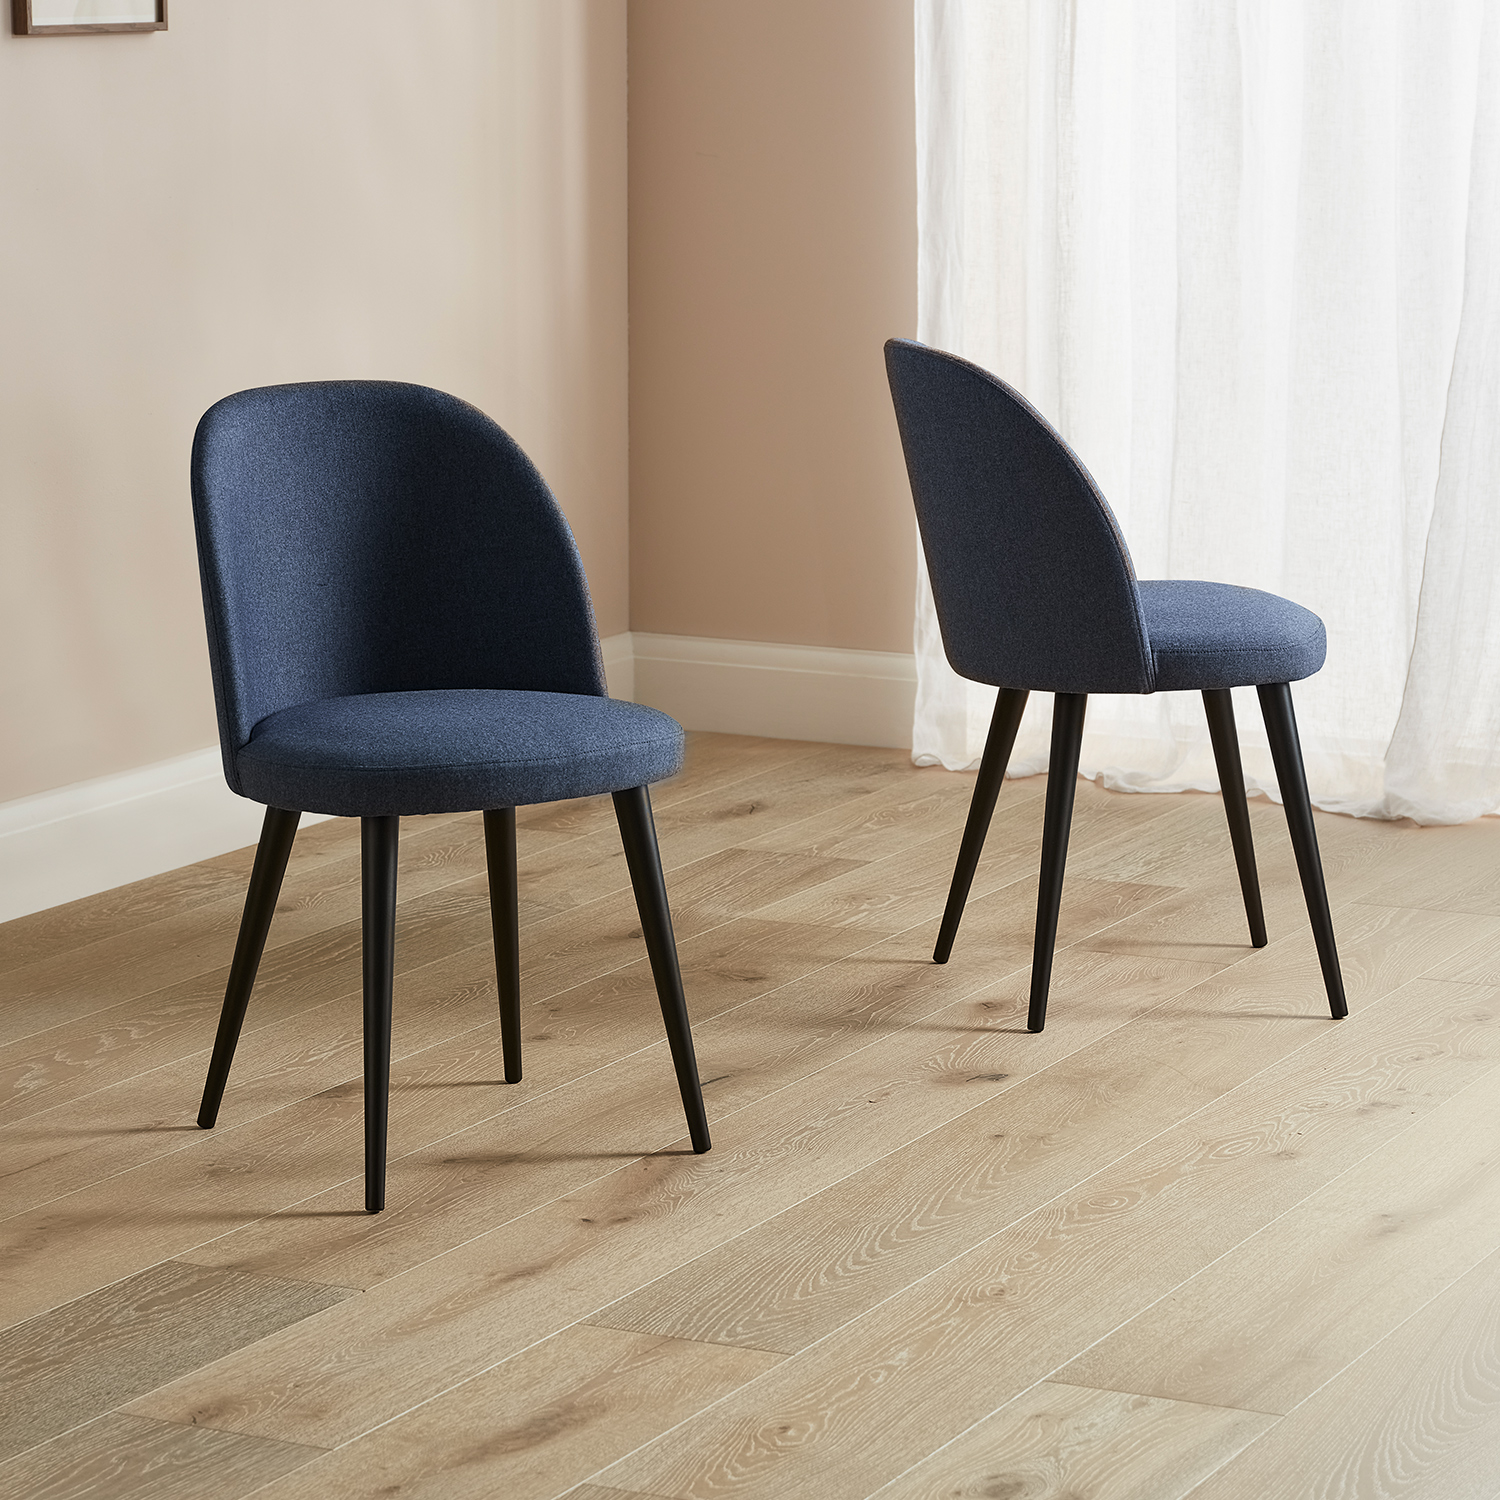 Burnham dining chairs in navy blue with black legs placed on a wooden floor